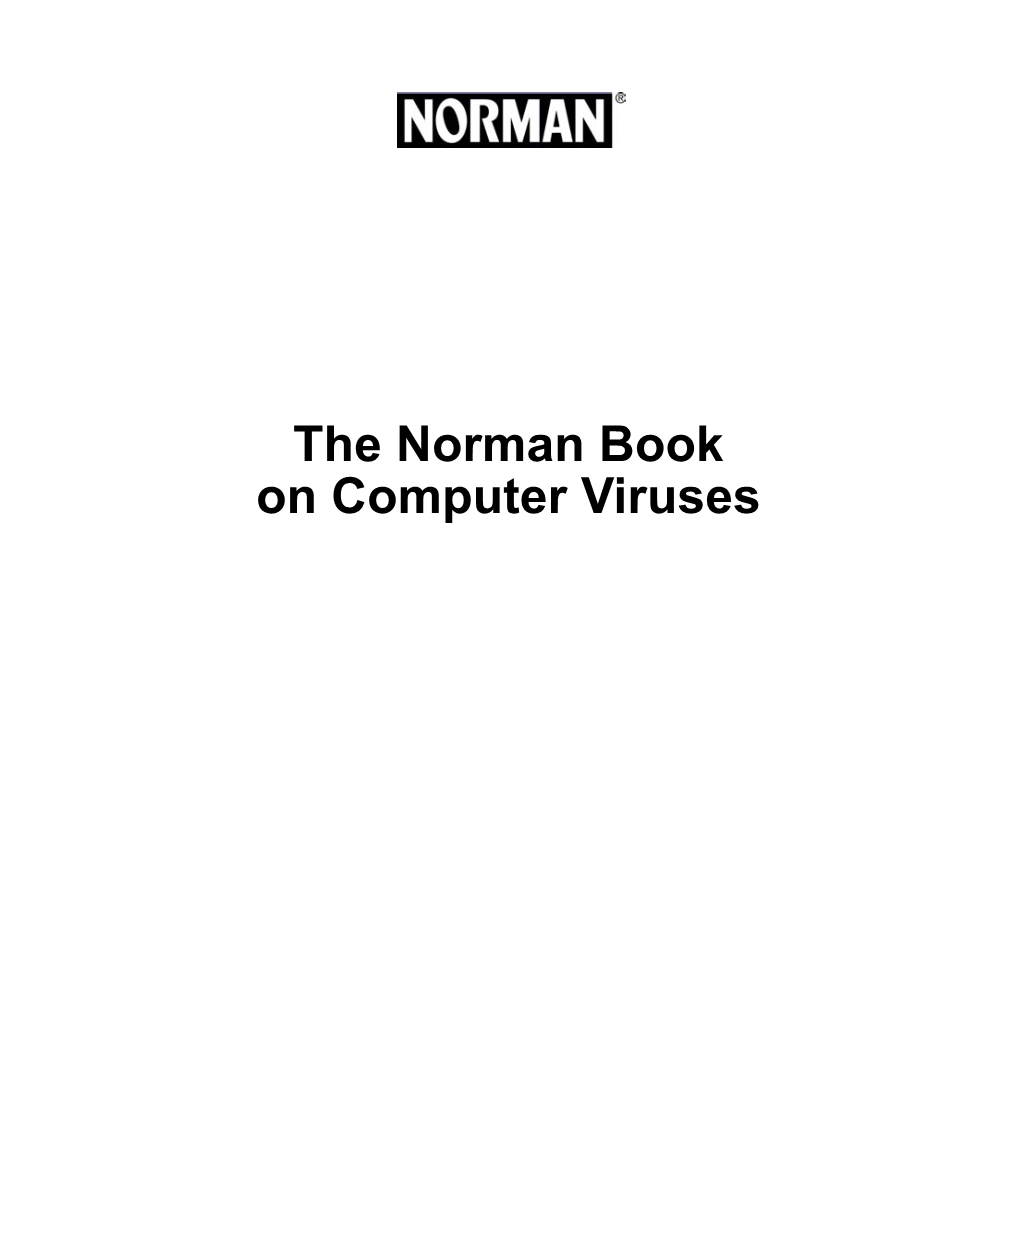 The Norman Book on Computer Viruses Ii Z the Norman Book on Computer Viruses